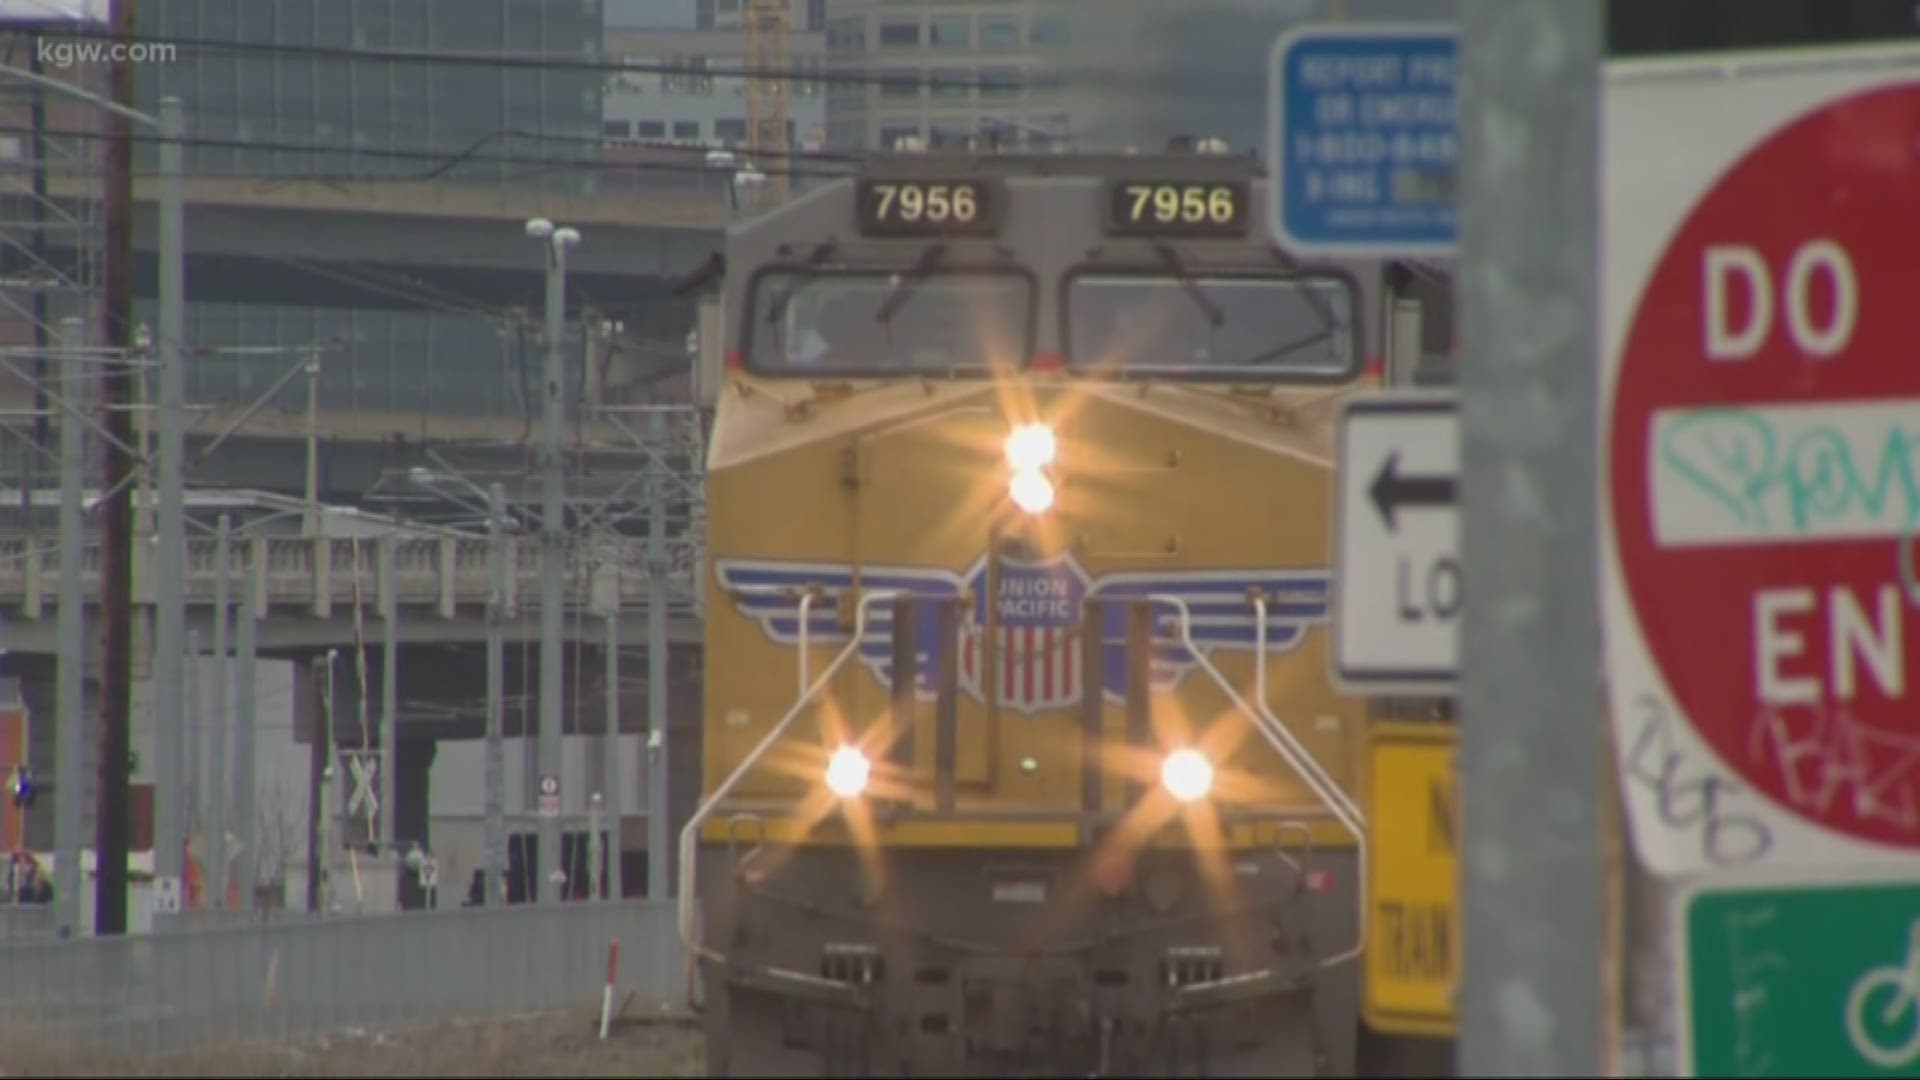 16 freight trains a day rumble along Water Avenue, infuriating motorists who often sit for 10 to 15 minutes. KGW traffic reporter Chris McGinness highlights some other crossings that drive people crazy.